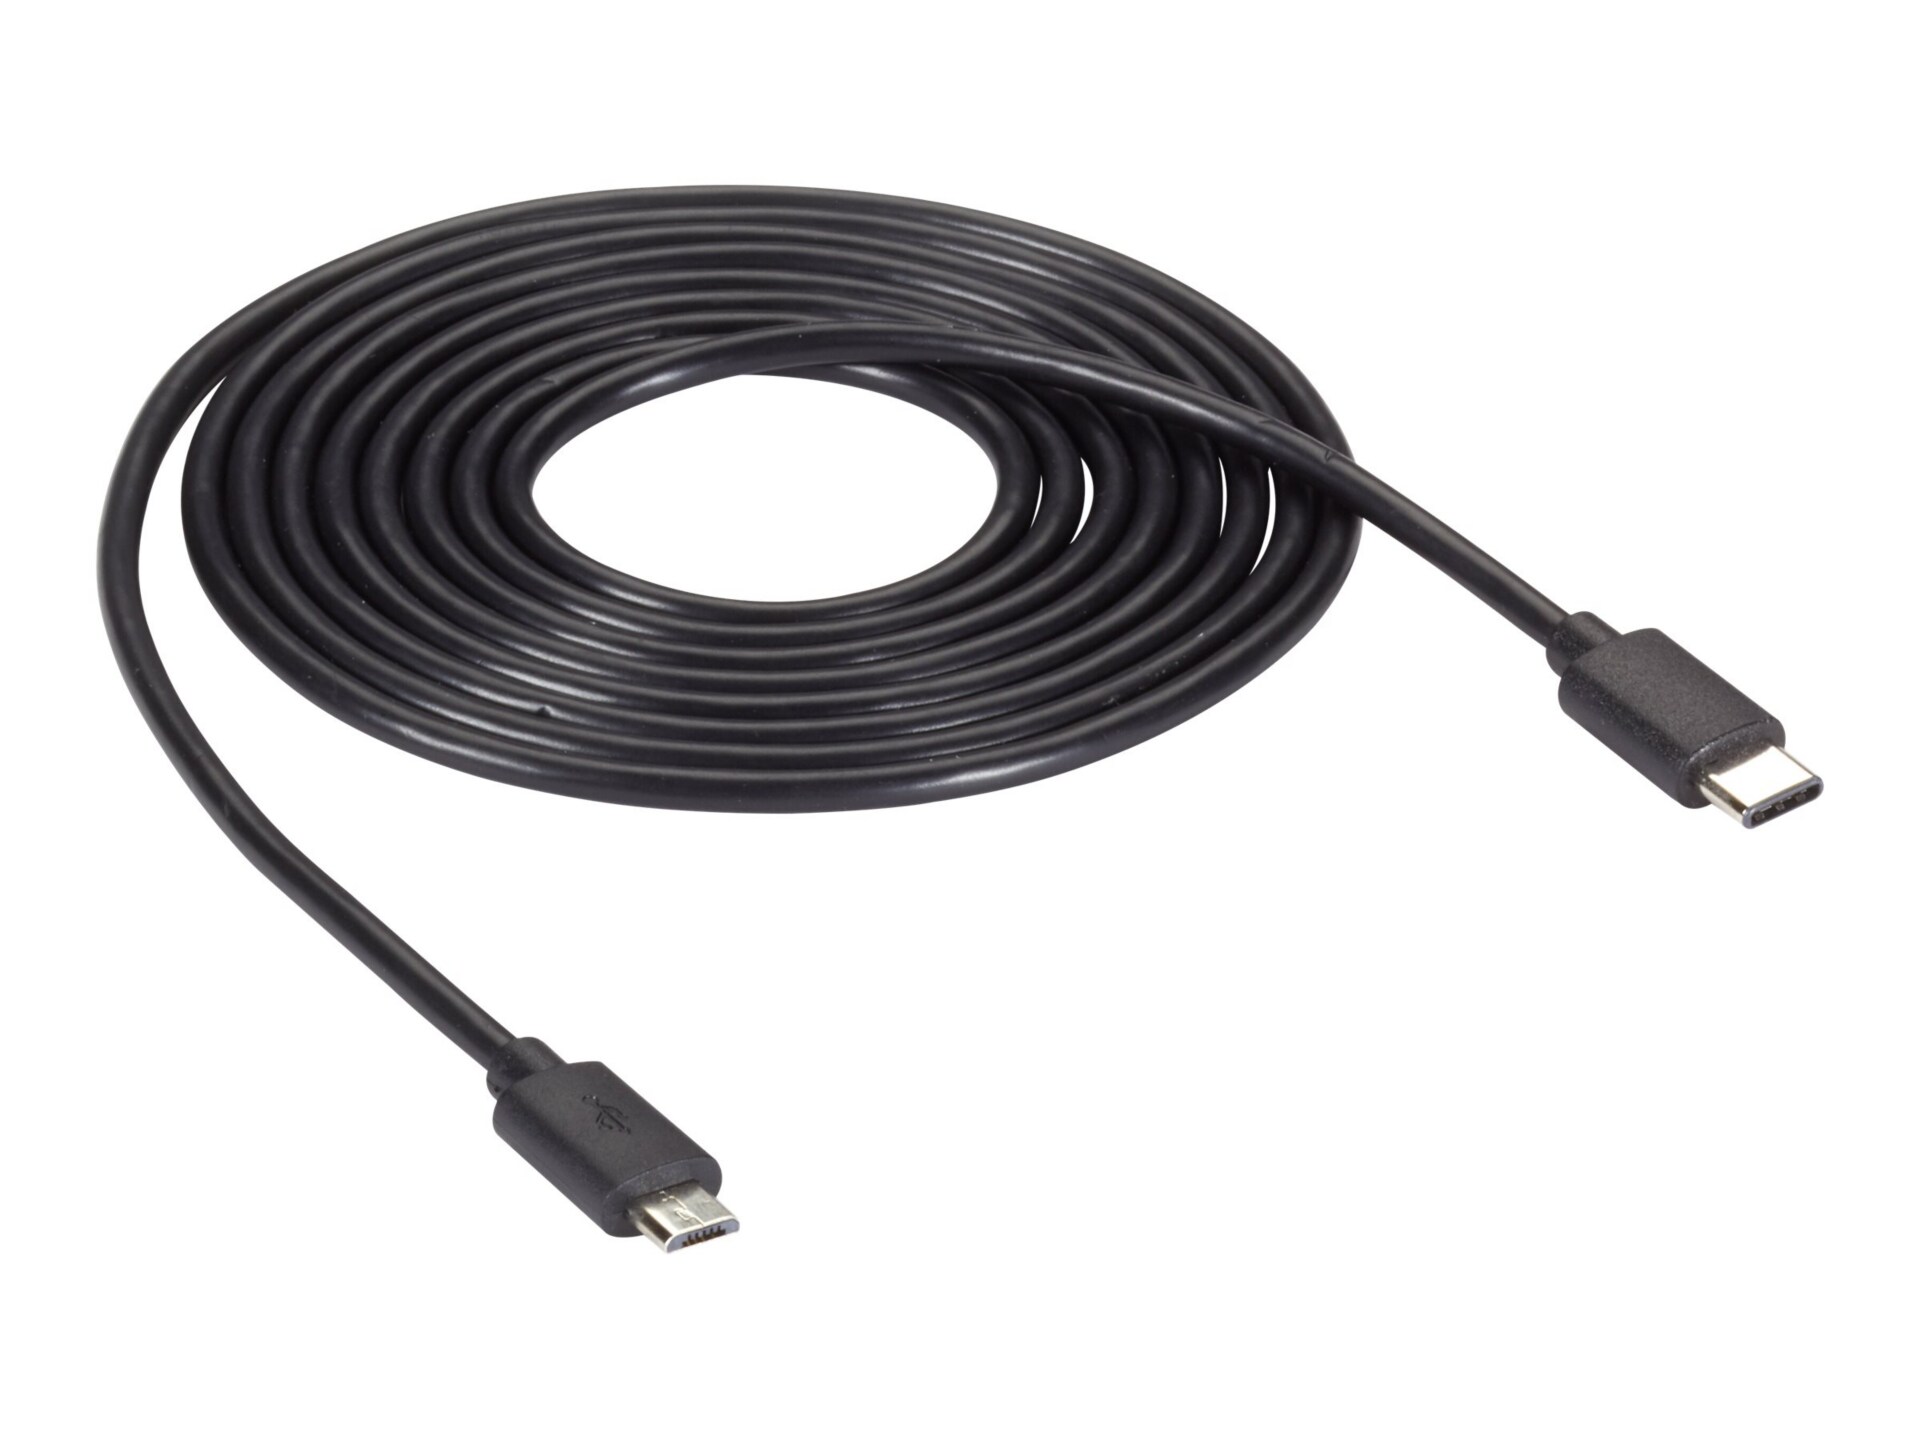 Black Box 2 Meter USB-C 3.1 Cable, Type C Male to USB2.0 Micro Male, 6ft